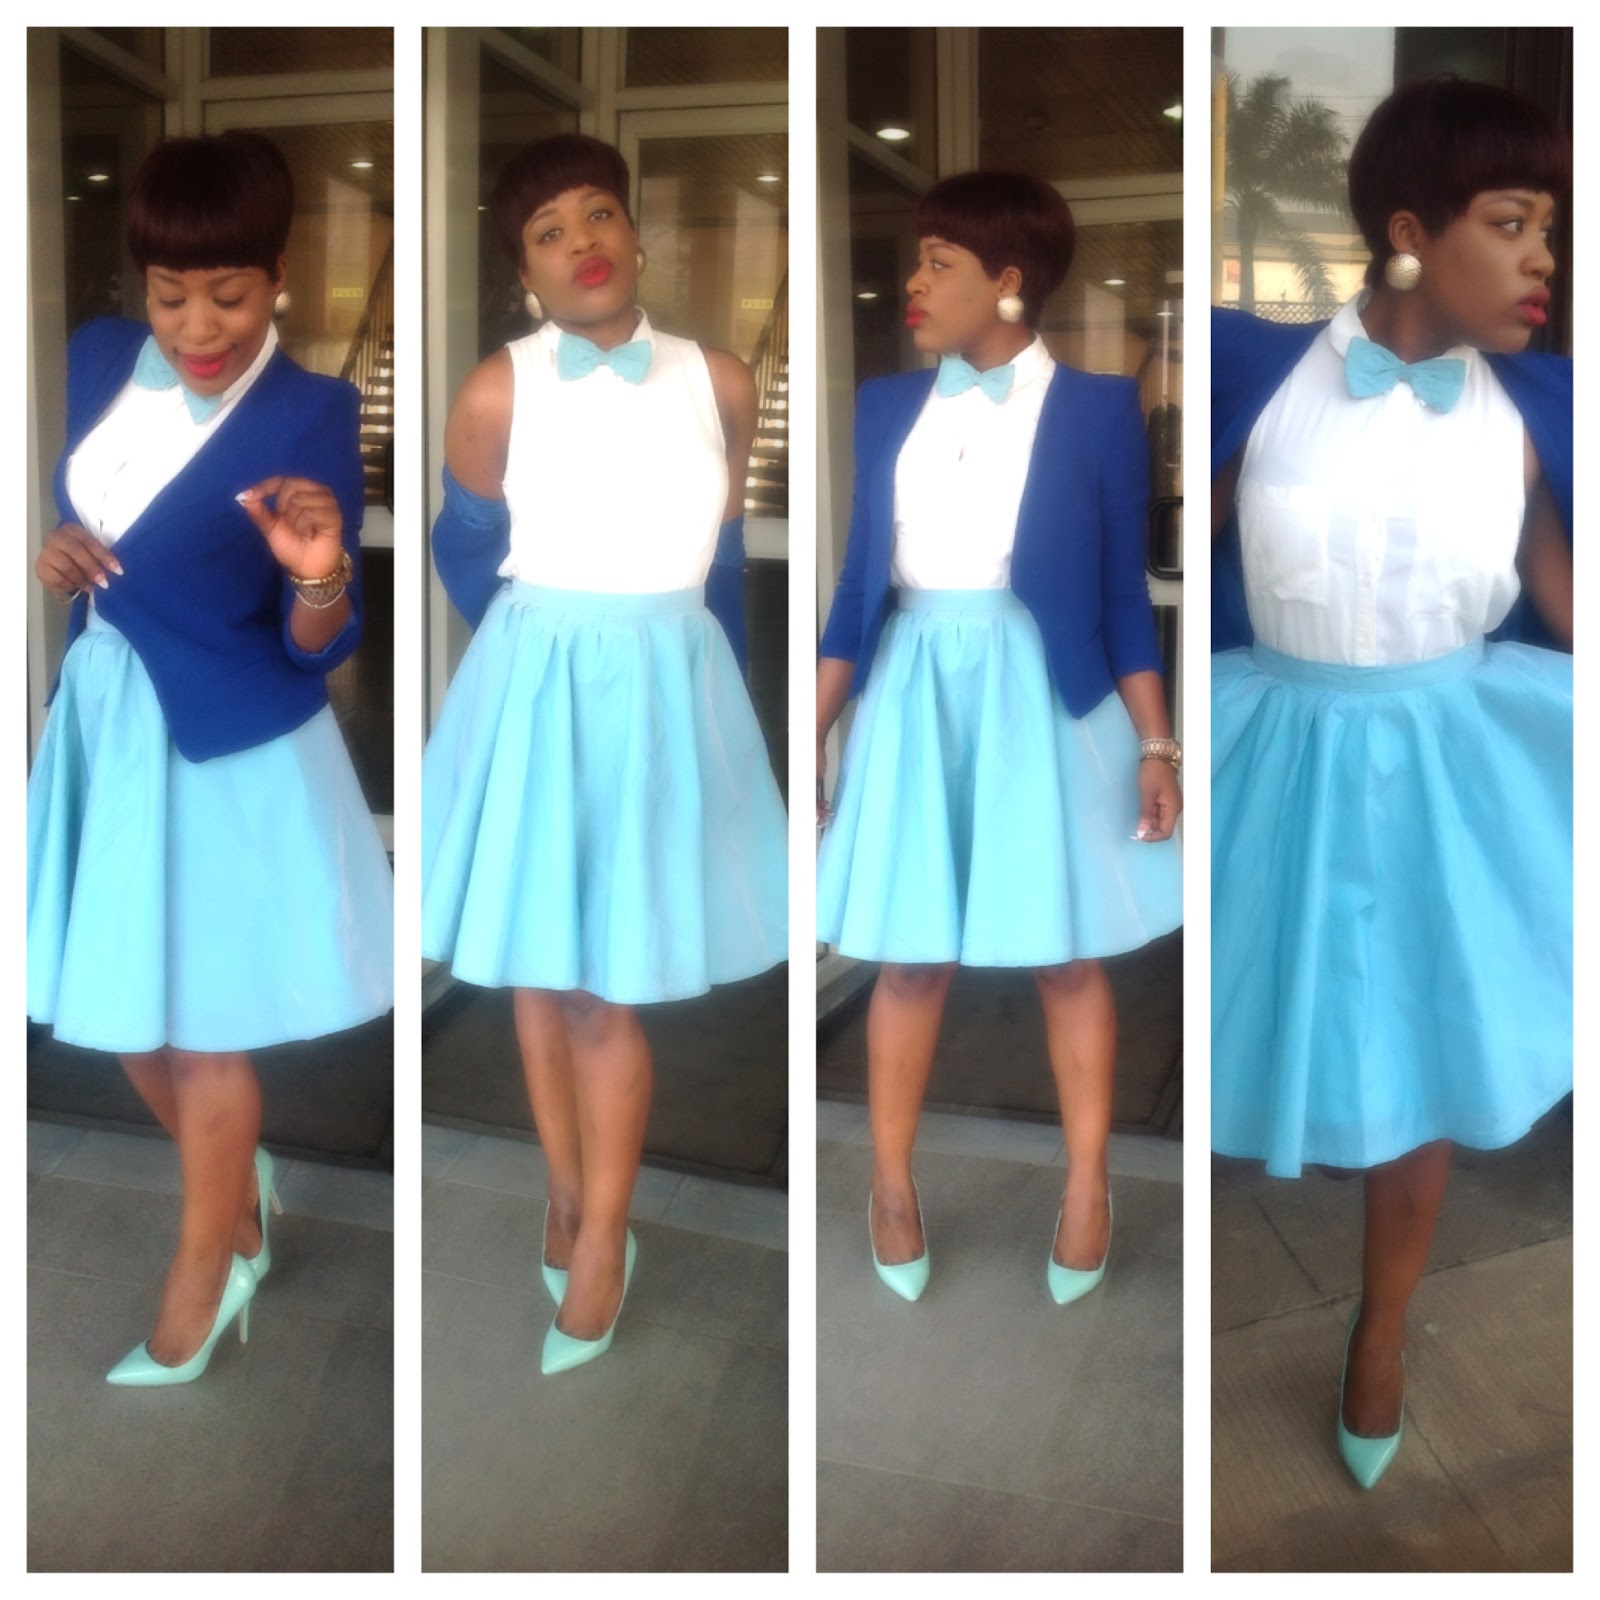 Ella Mo's Blog: OOTD: Tailored Skater Skirt and Bowtie by TOPEDO COUTURE